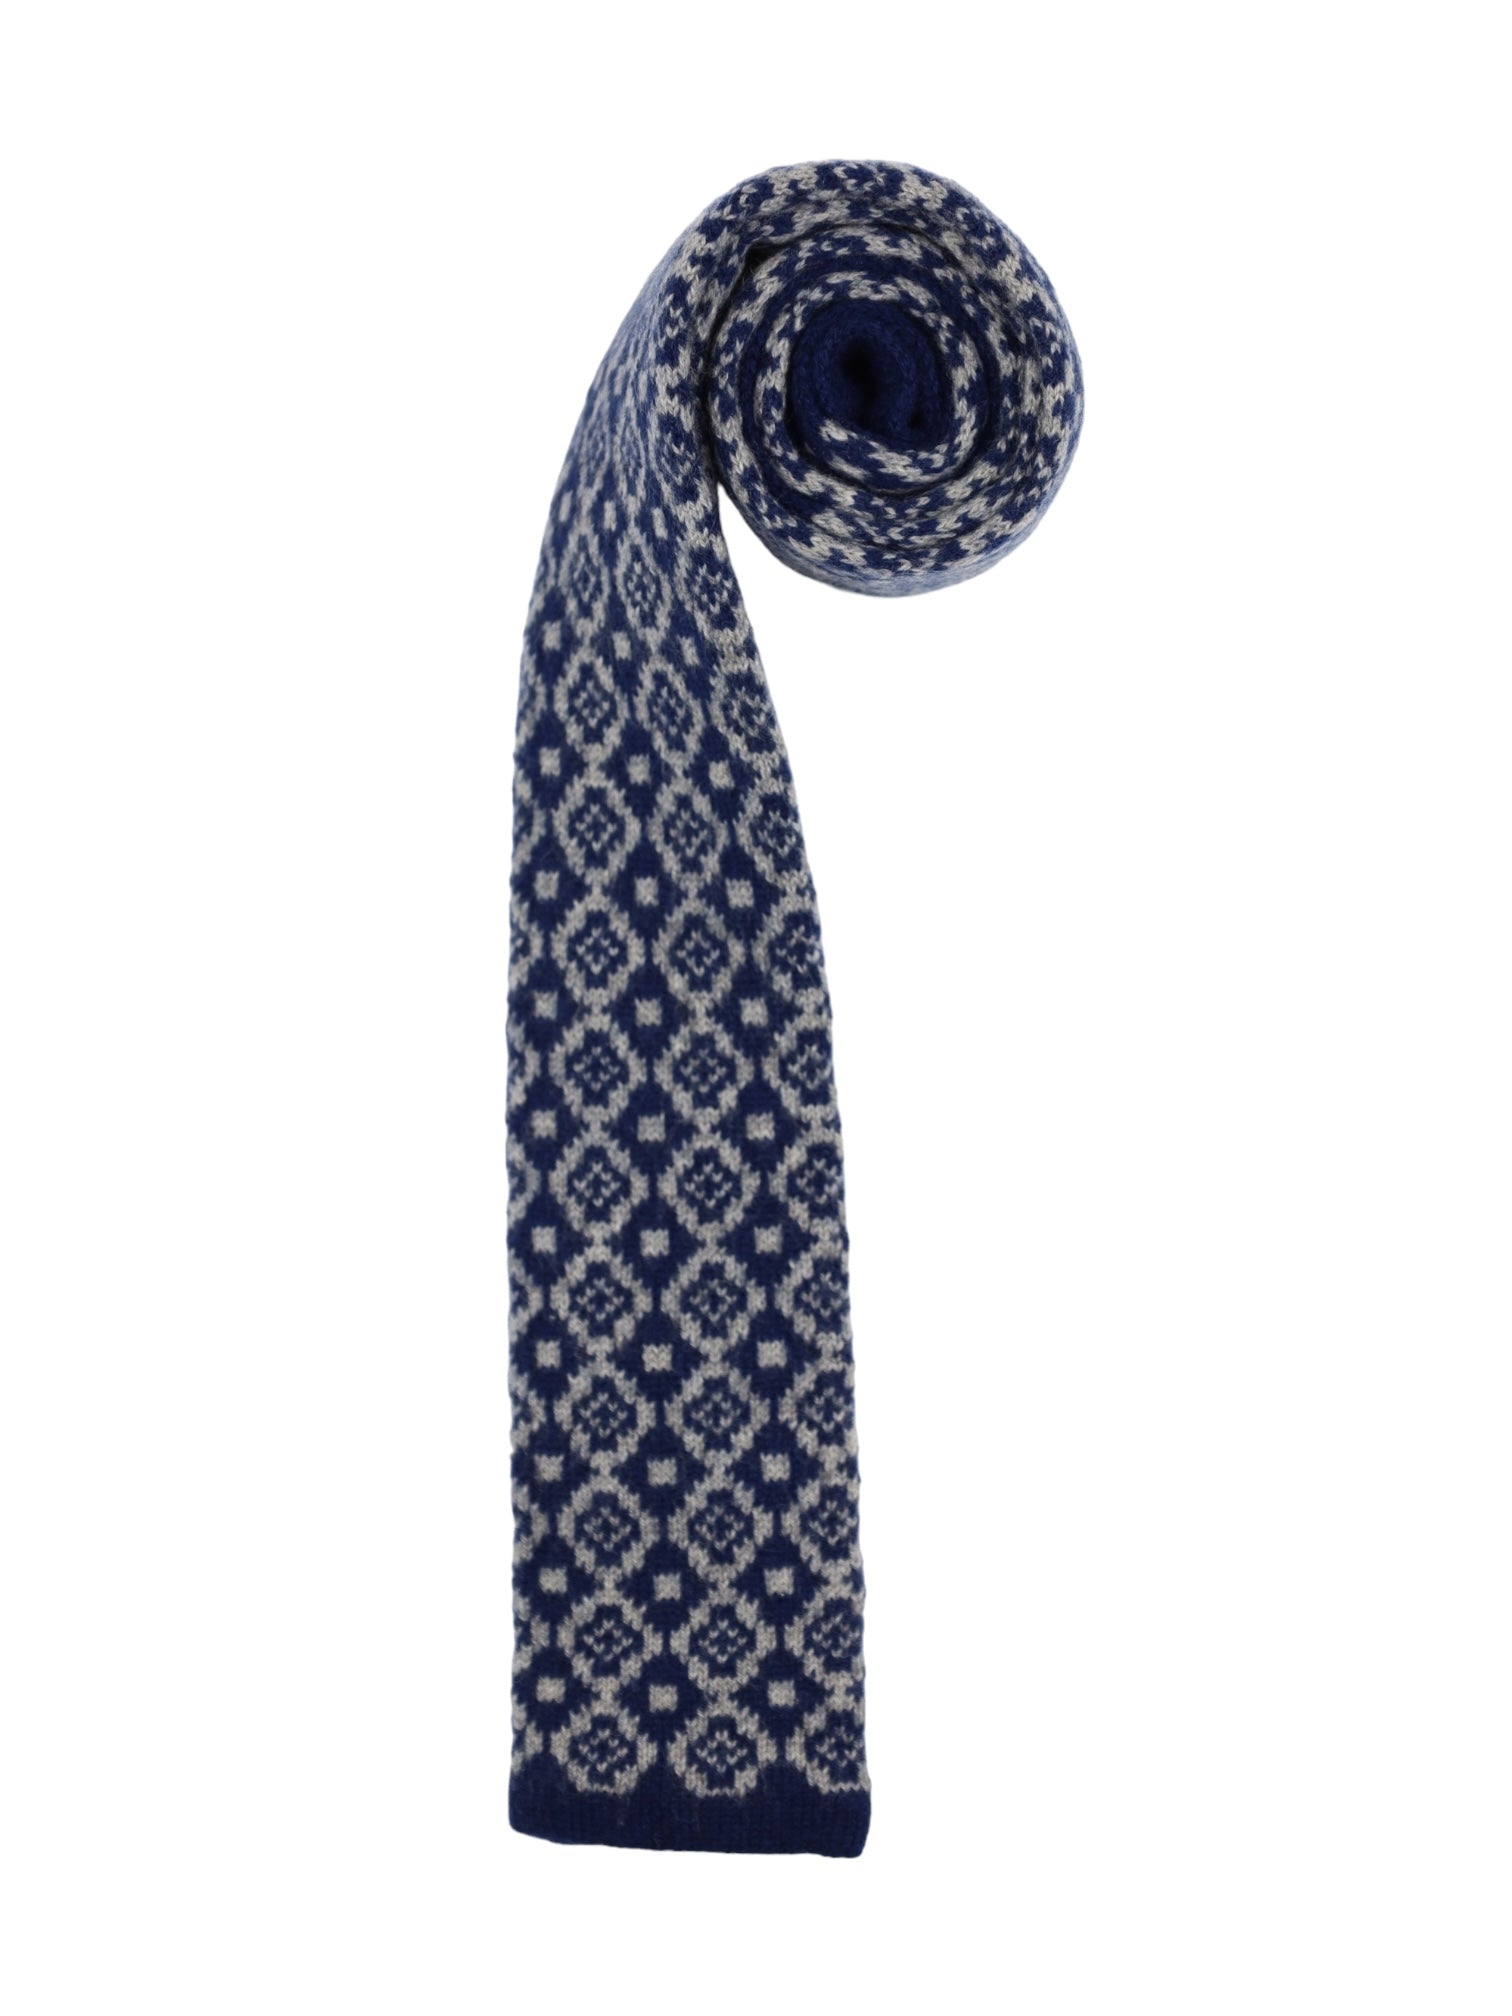 Kiton Blue & Light Grey Floral Knitted Cashmere Tie